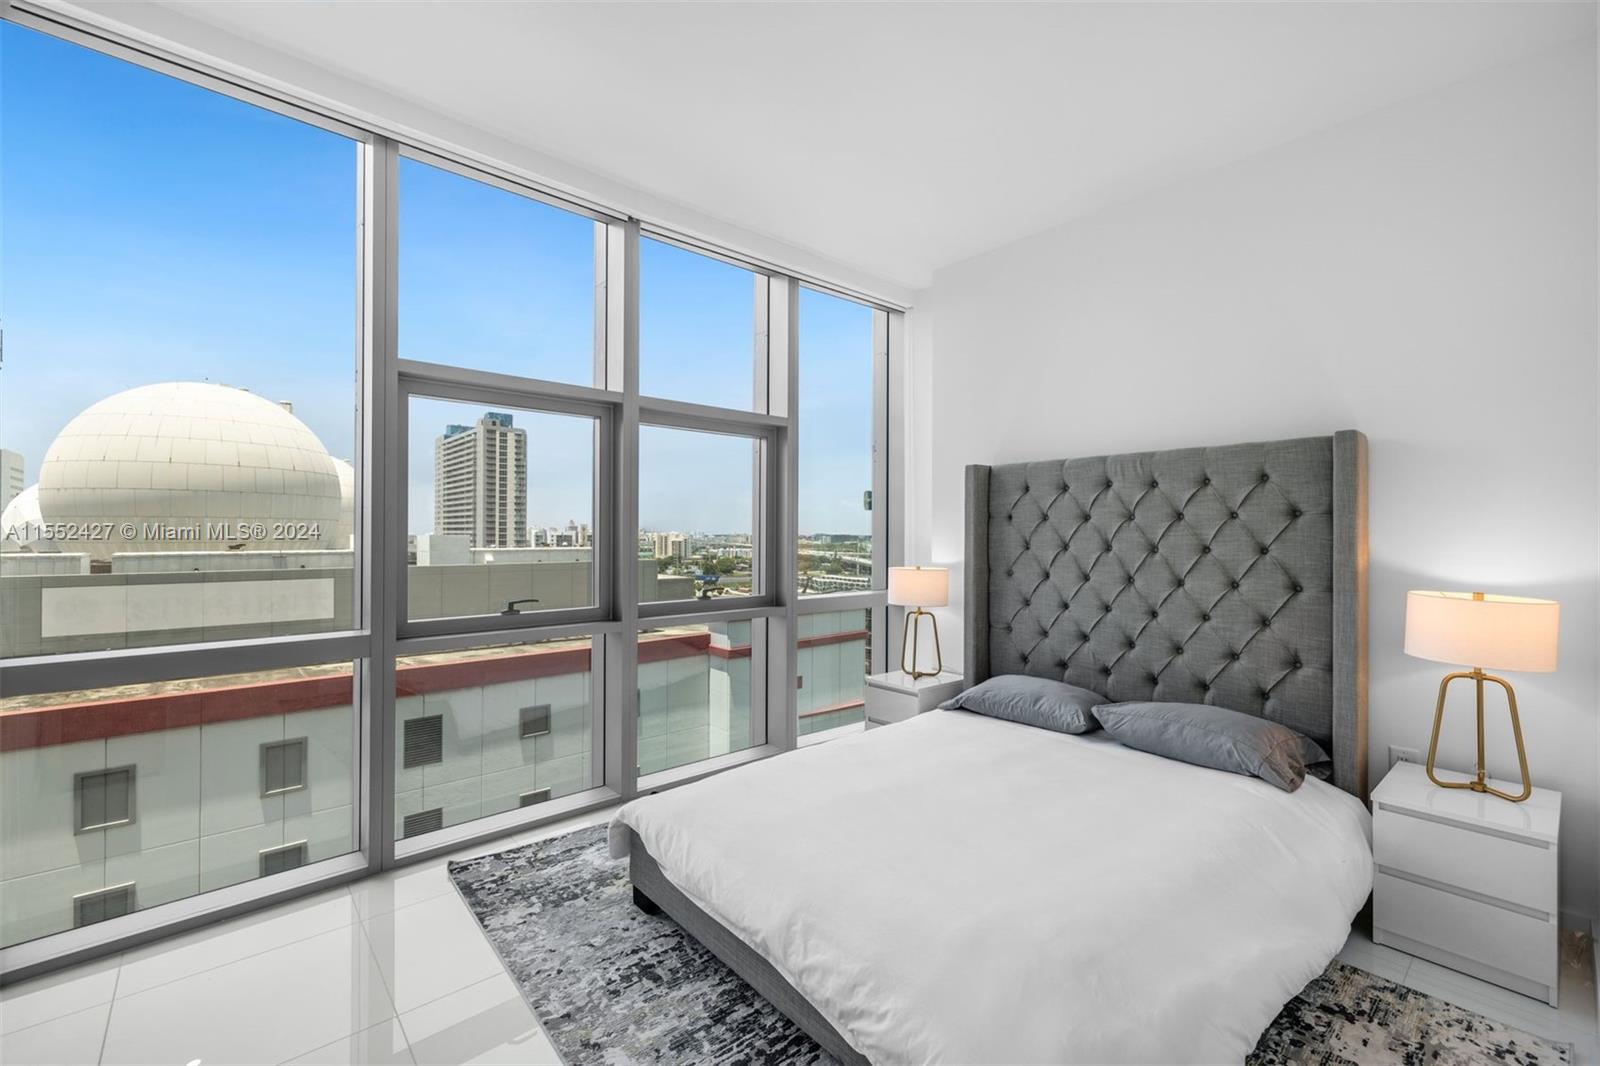 851 NE 1st Ave Unit 1008, Miami, Florida, 33132, United States, 2 Bedrooms Bedrooms, ,3 BathroomsBathrooms,Residential,For Sale,851 NE 1st Ave Unit 1008,1486496